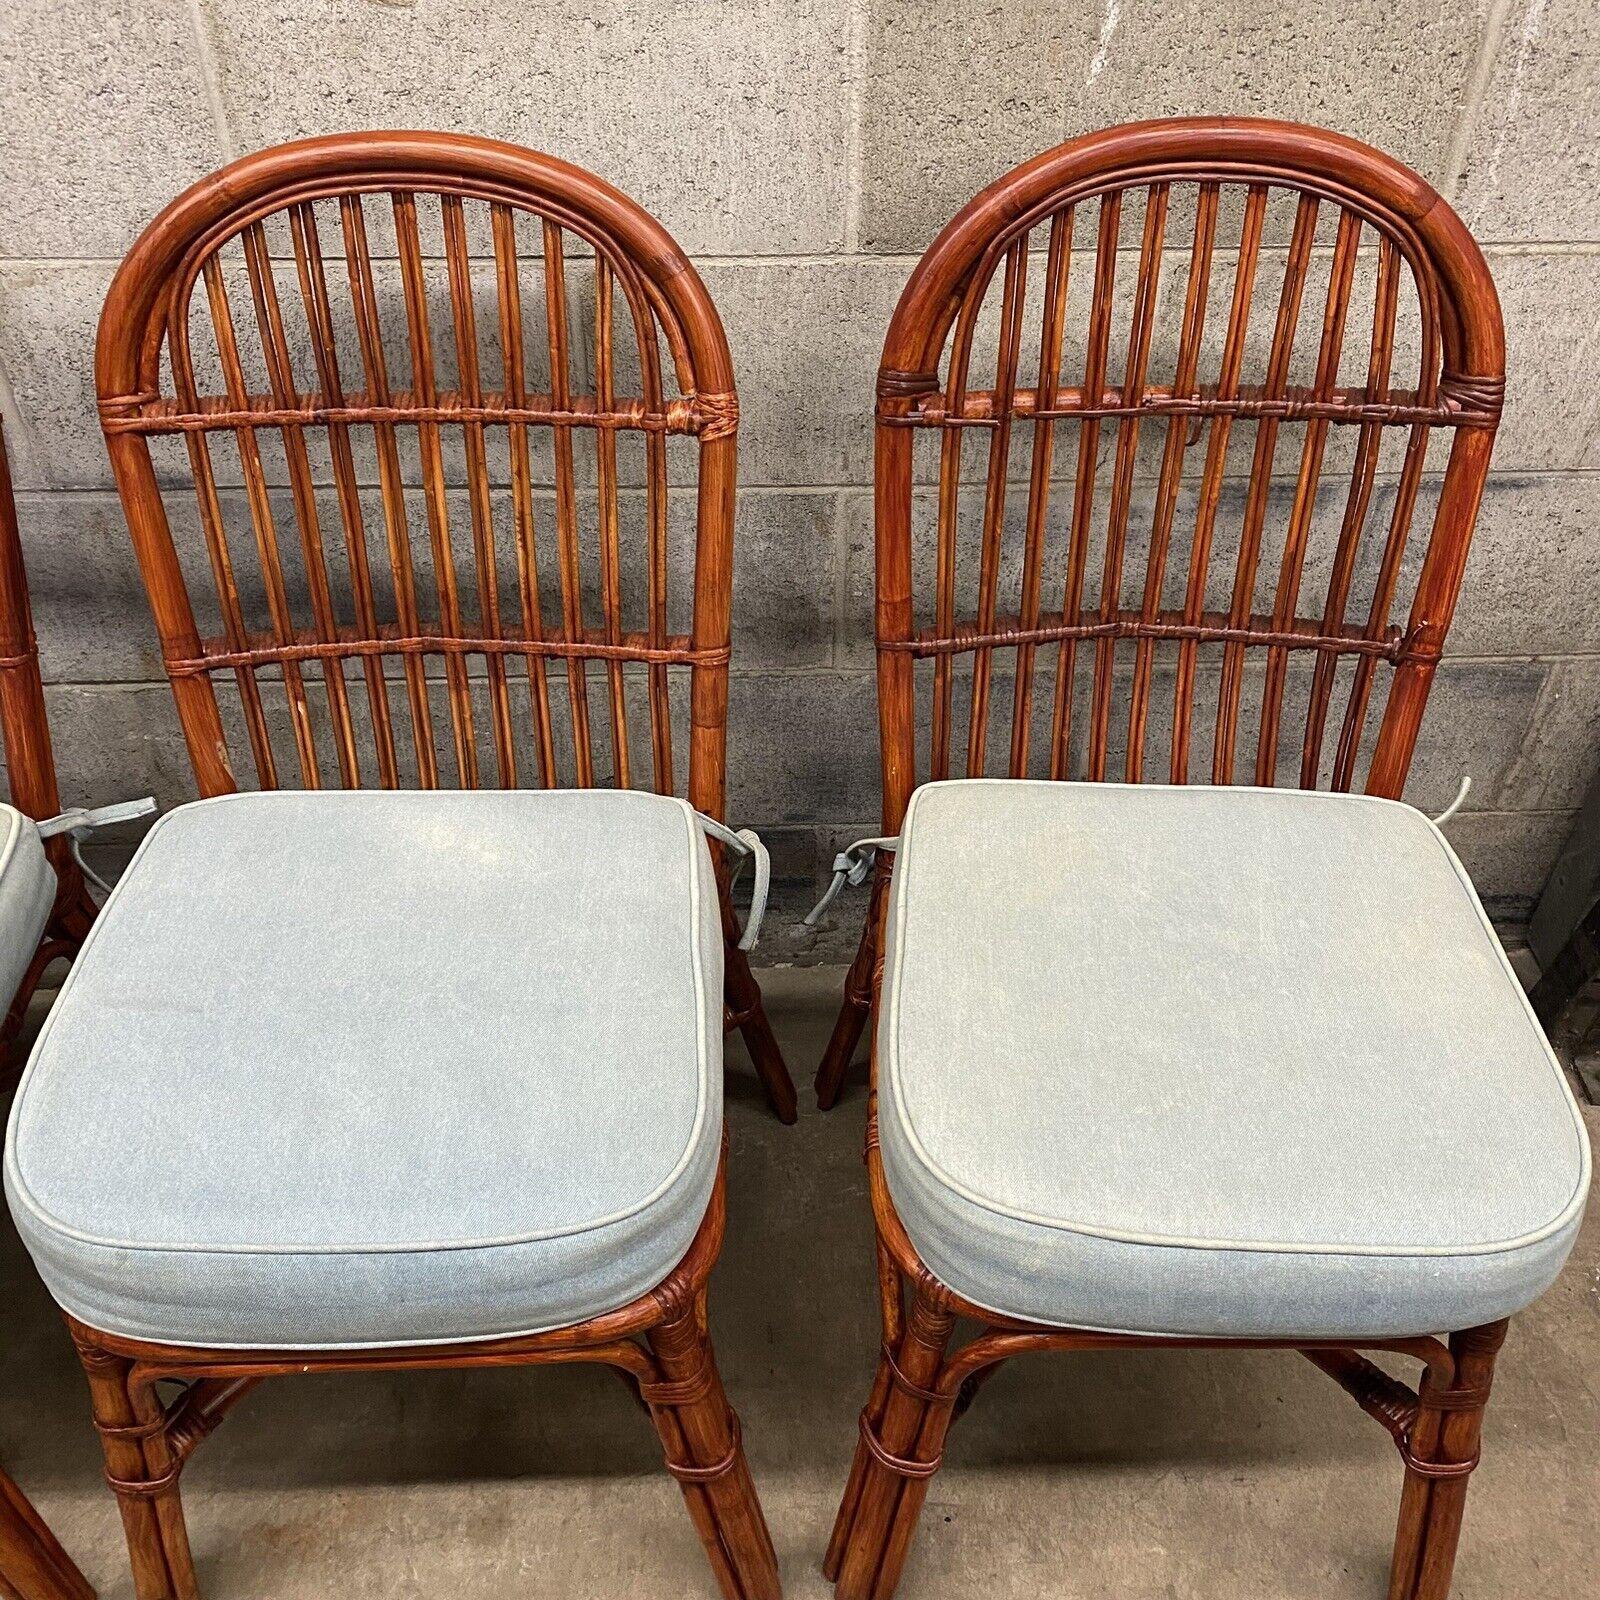 20th Century Vintage Hollywood Regency Palm Beach Bamboo Dining Side Chairs - Set of 4 For Sale